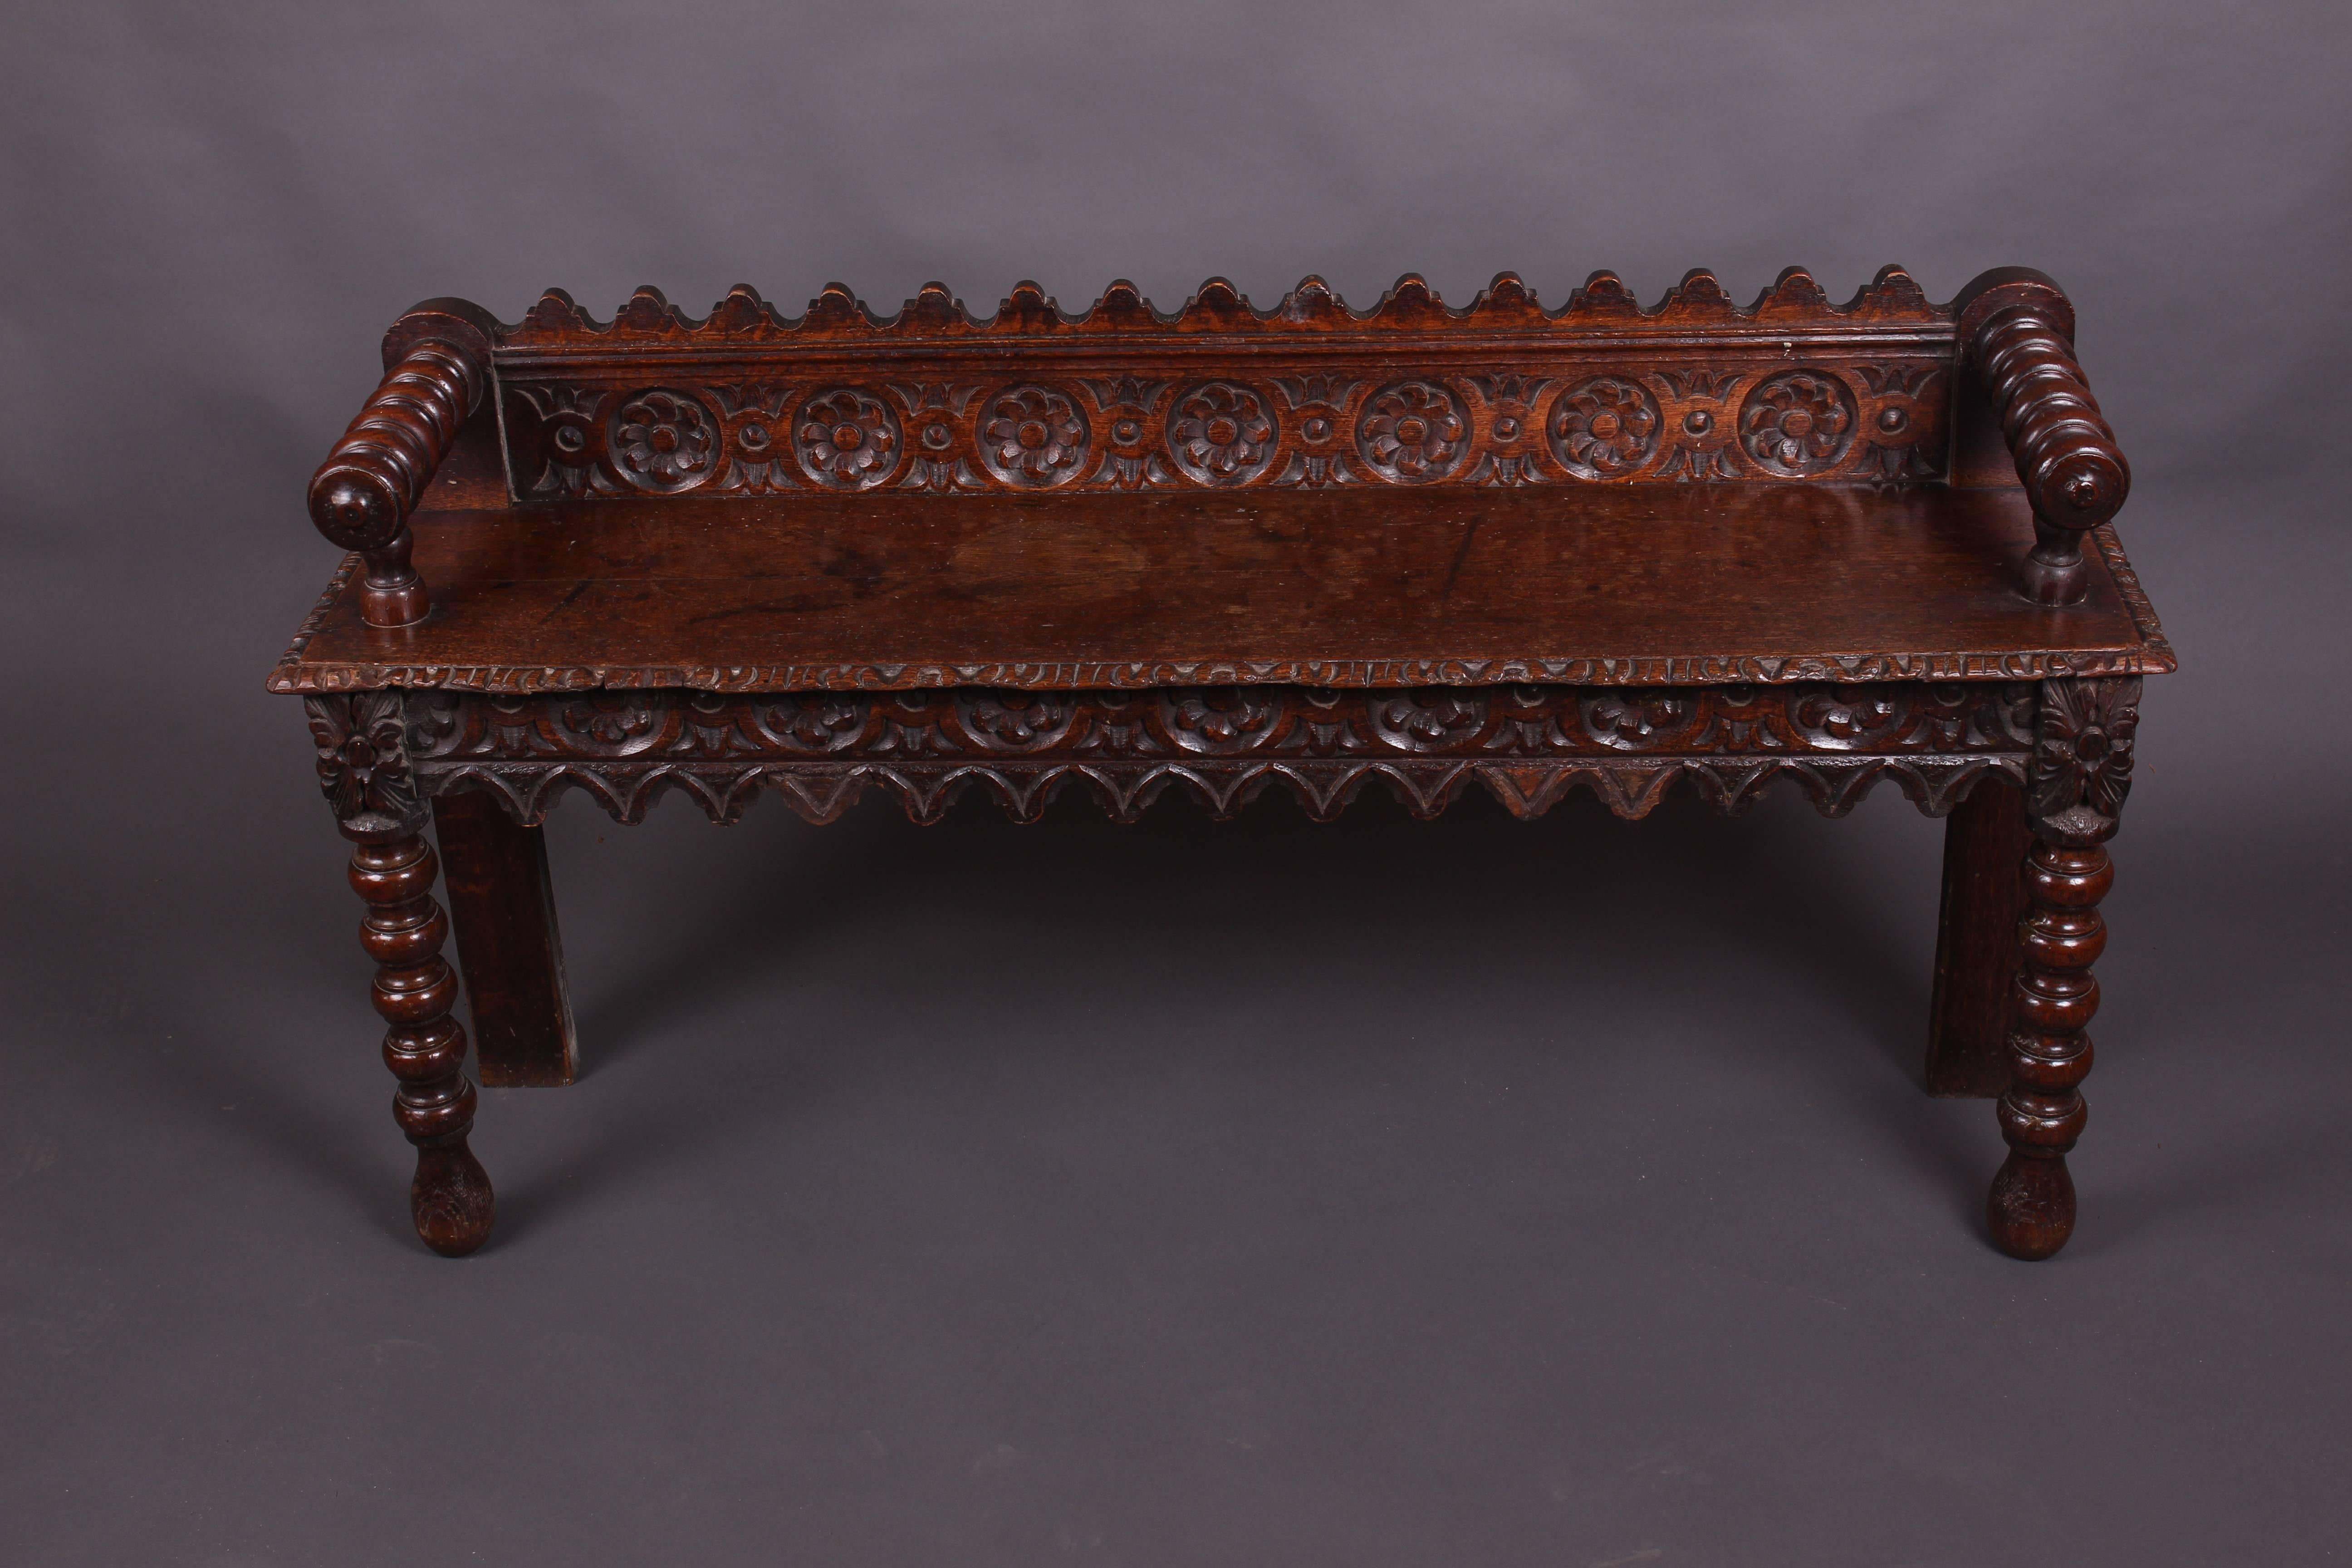 An attractive Victorian Oak window seat having Gothic style rosette carvings on the back rail and front skirt. Pretty Egg and Dart carving to the seat lip. Turned armrests and front legs terminating on bun feet. An all round functional and good